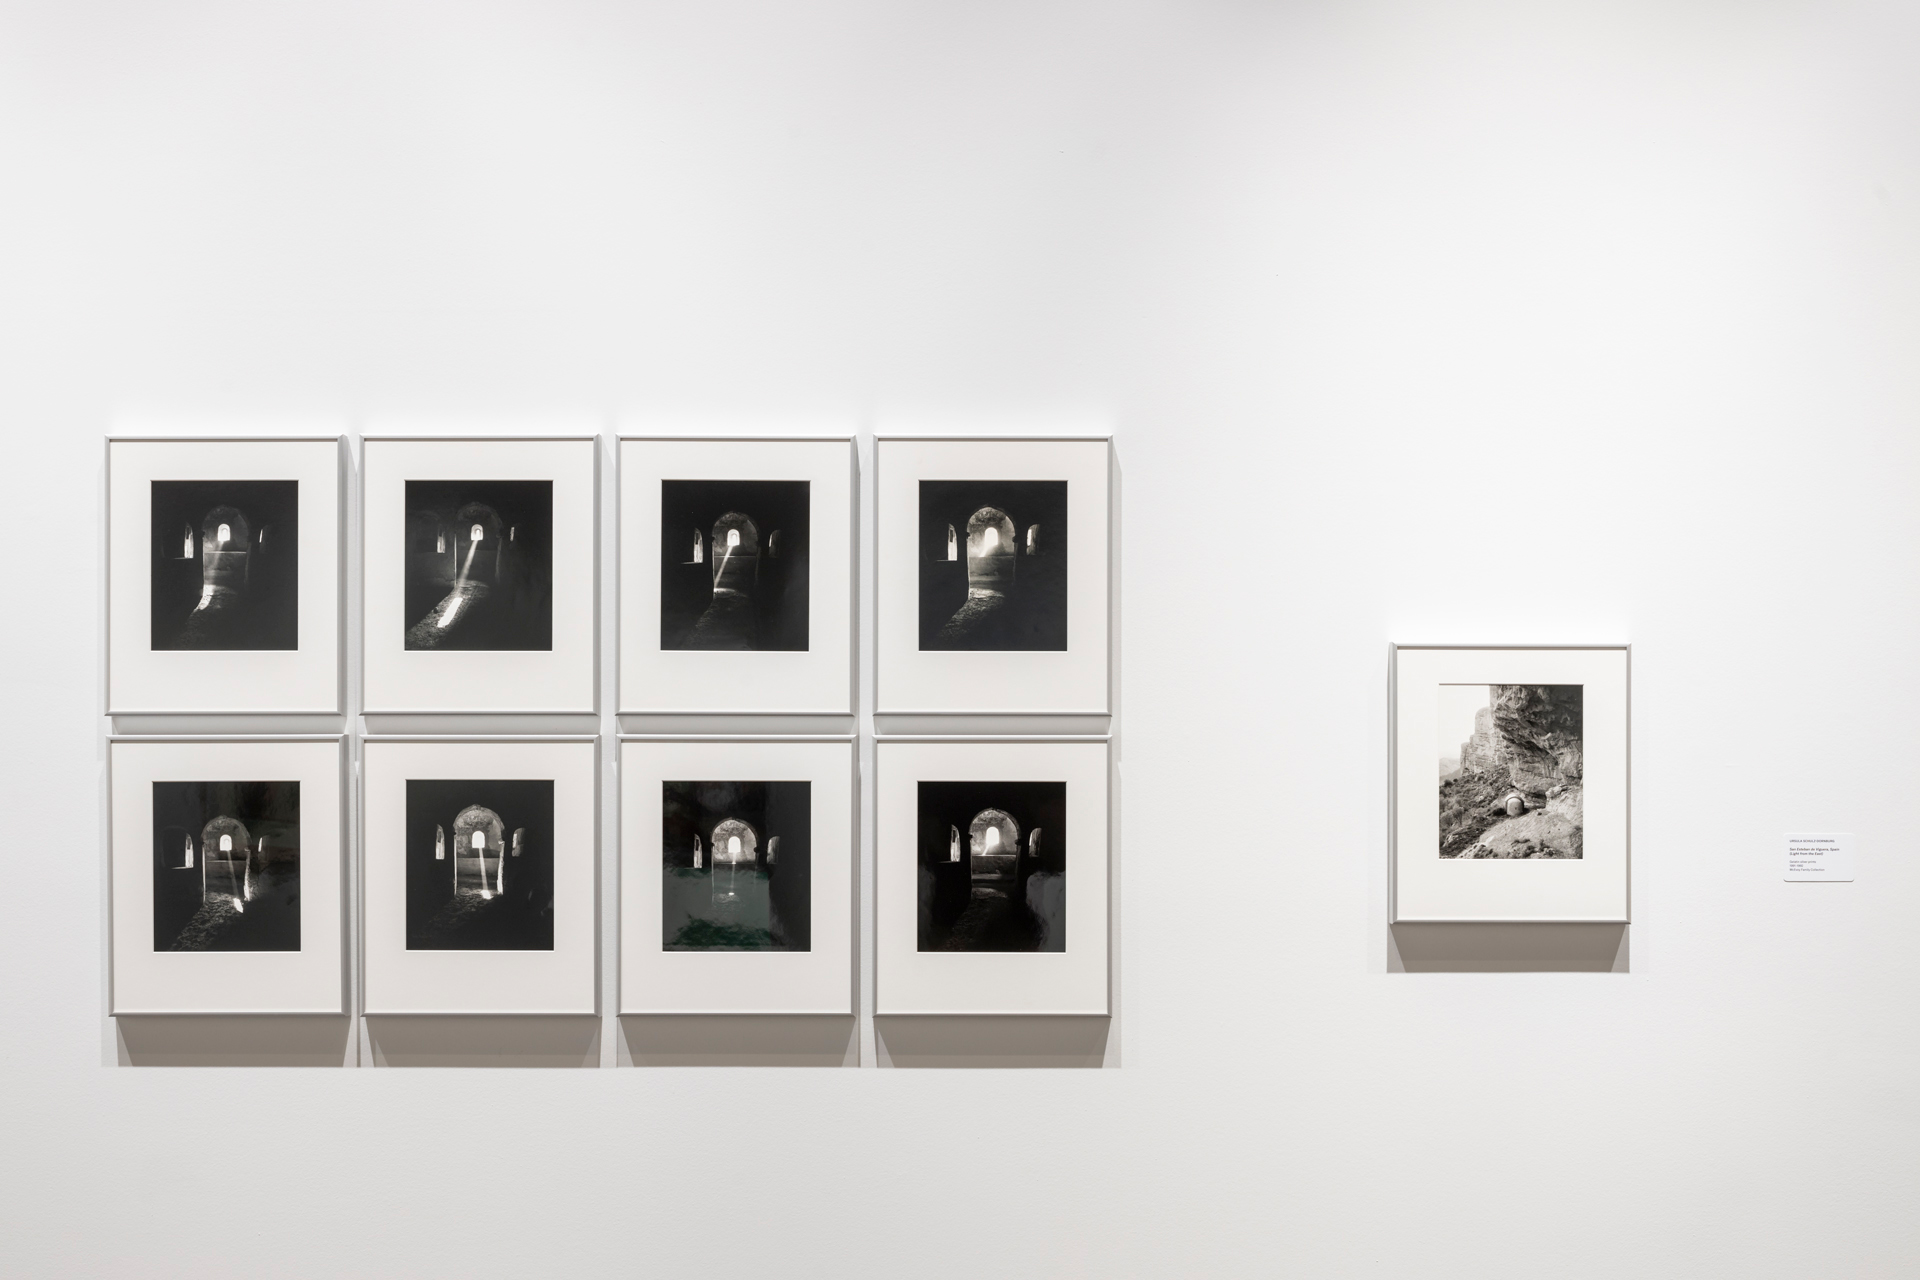 Eight framed black-and-white photographs of an arched interior space hung in grid with one photograph to right